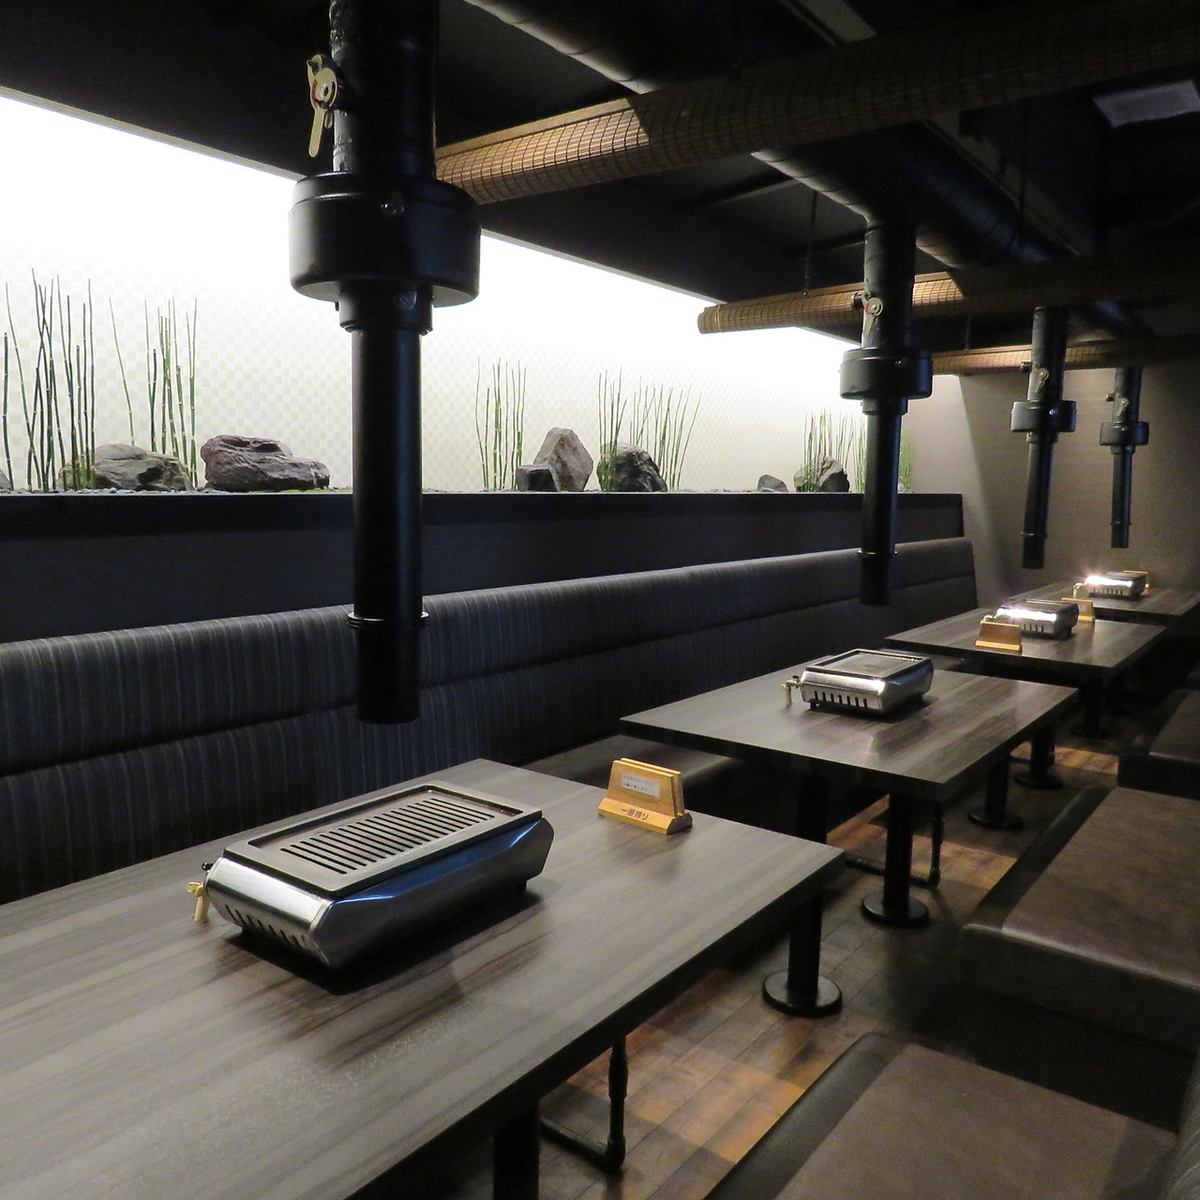 ★We also have tatami rooms, sofa seats, and semi-private rooms★